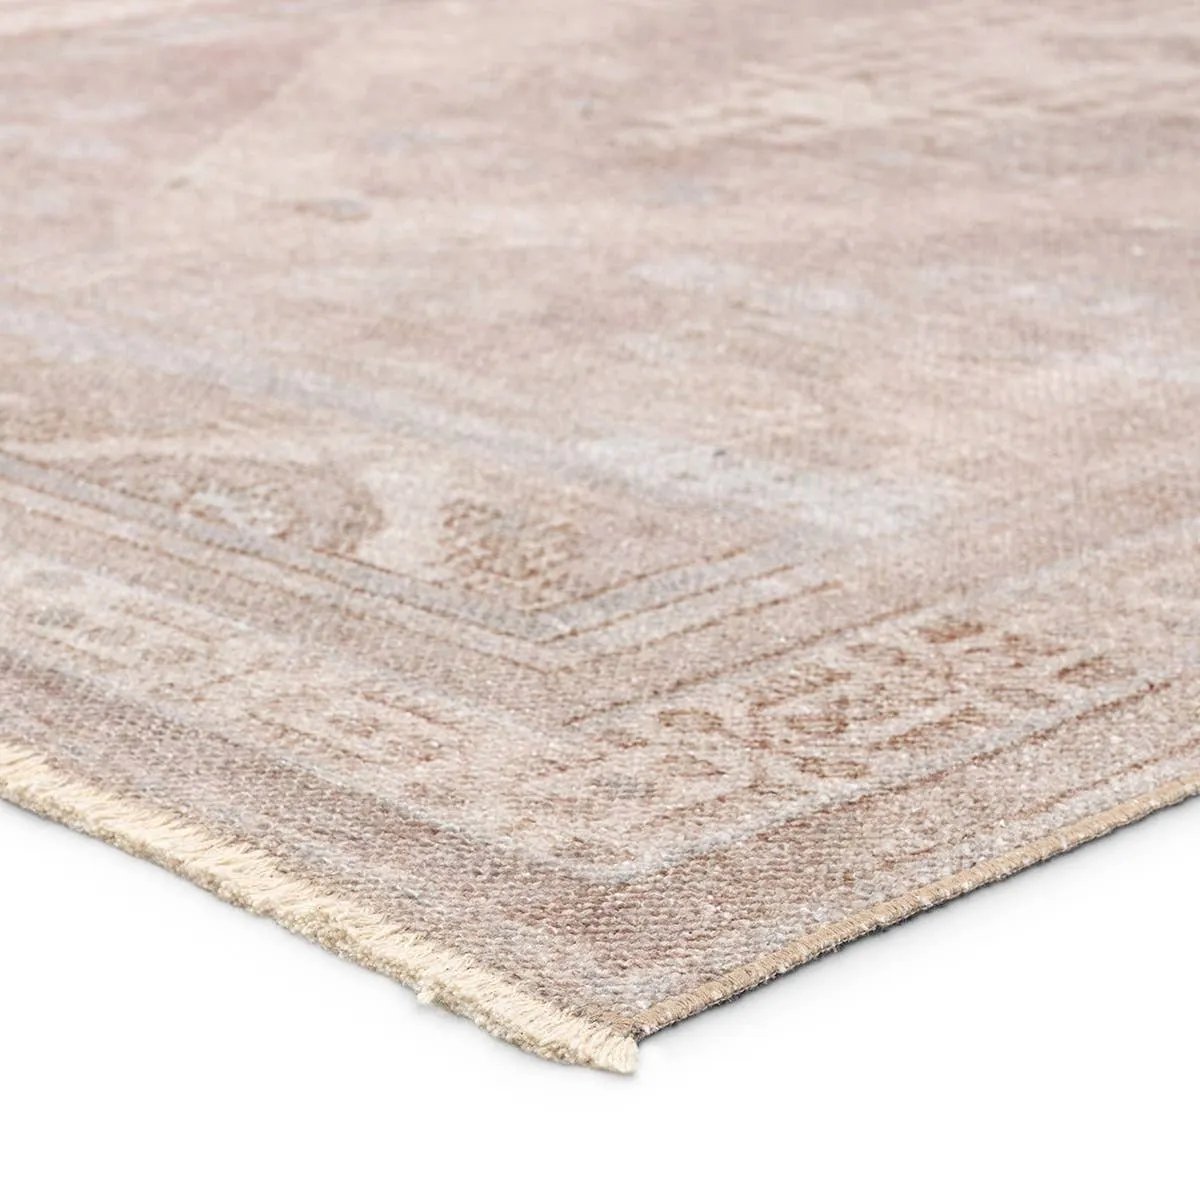 Distressed, vintage designs offer an elevated tone for the Lumal Collection. The Orame rug features a Southwestern-inspired medallion, geometric border, and intricate detailing in tones of mauve, light blue, brown, and cream. This machine washable rug is stain resistant and easy to clean, perfect for homes with children and pets. Amethyst Home provides interior design, new home construction design consulting, vintage area rugs, and lighting in the Charlotte metro area.